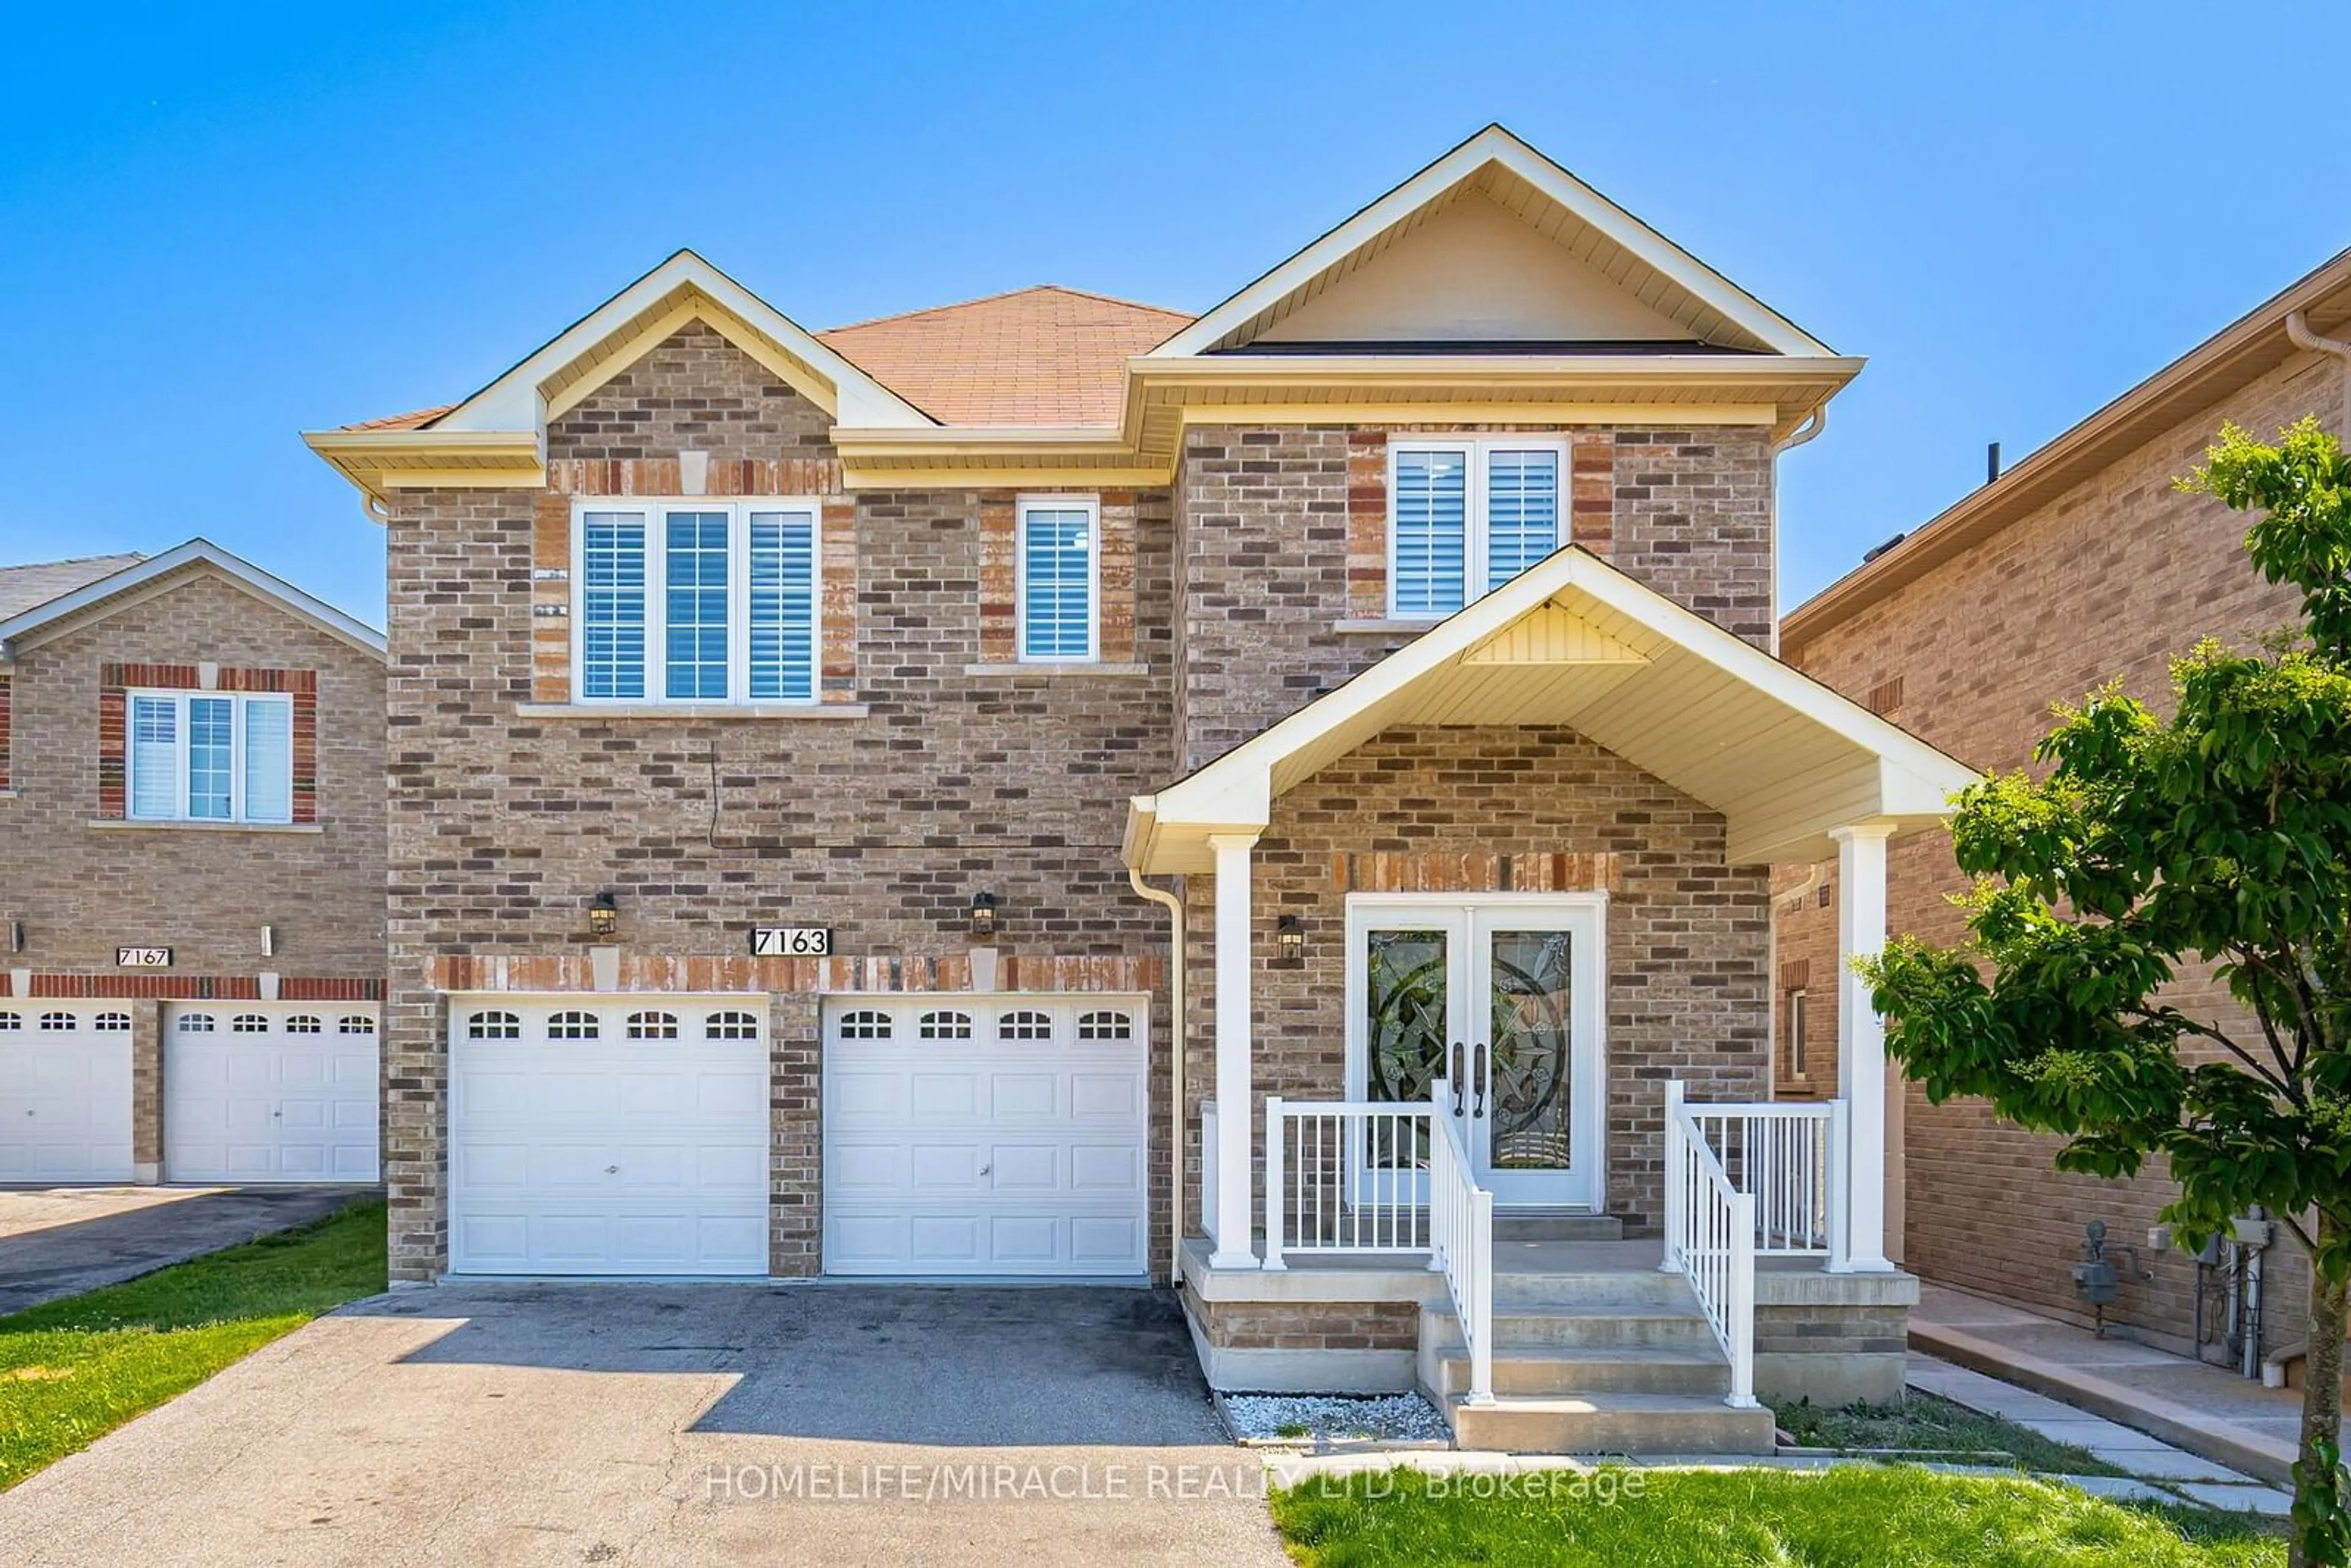 Home with brick exterior material for 7163 Wrigley Crt, Mississauga Ontario L5W 0C8